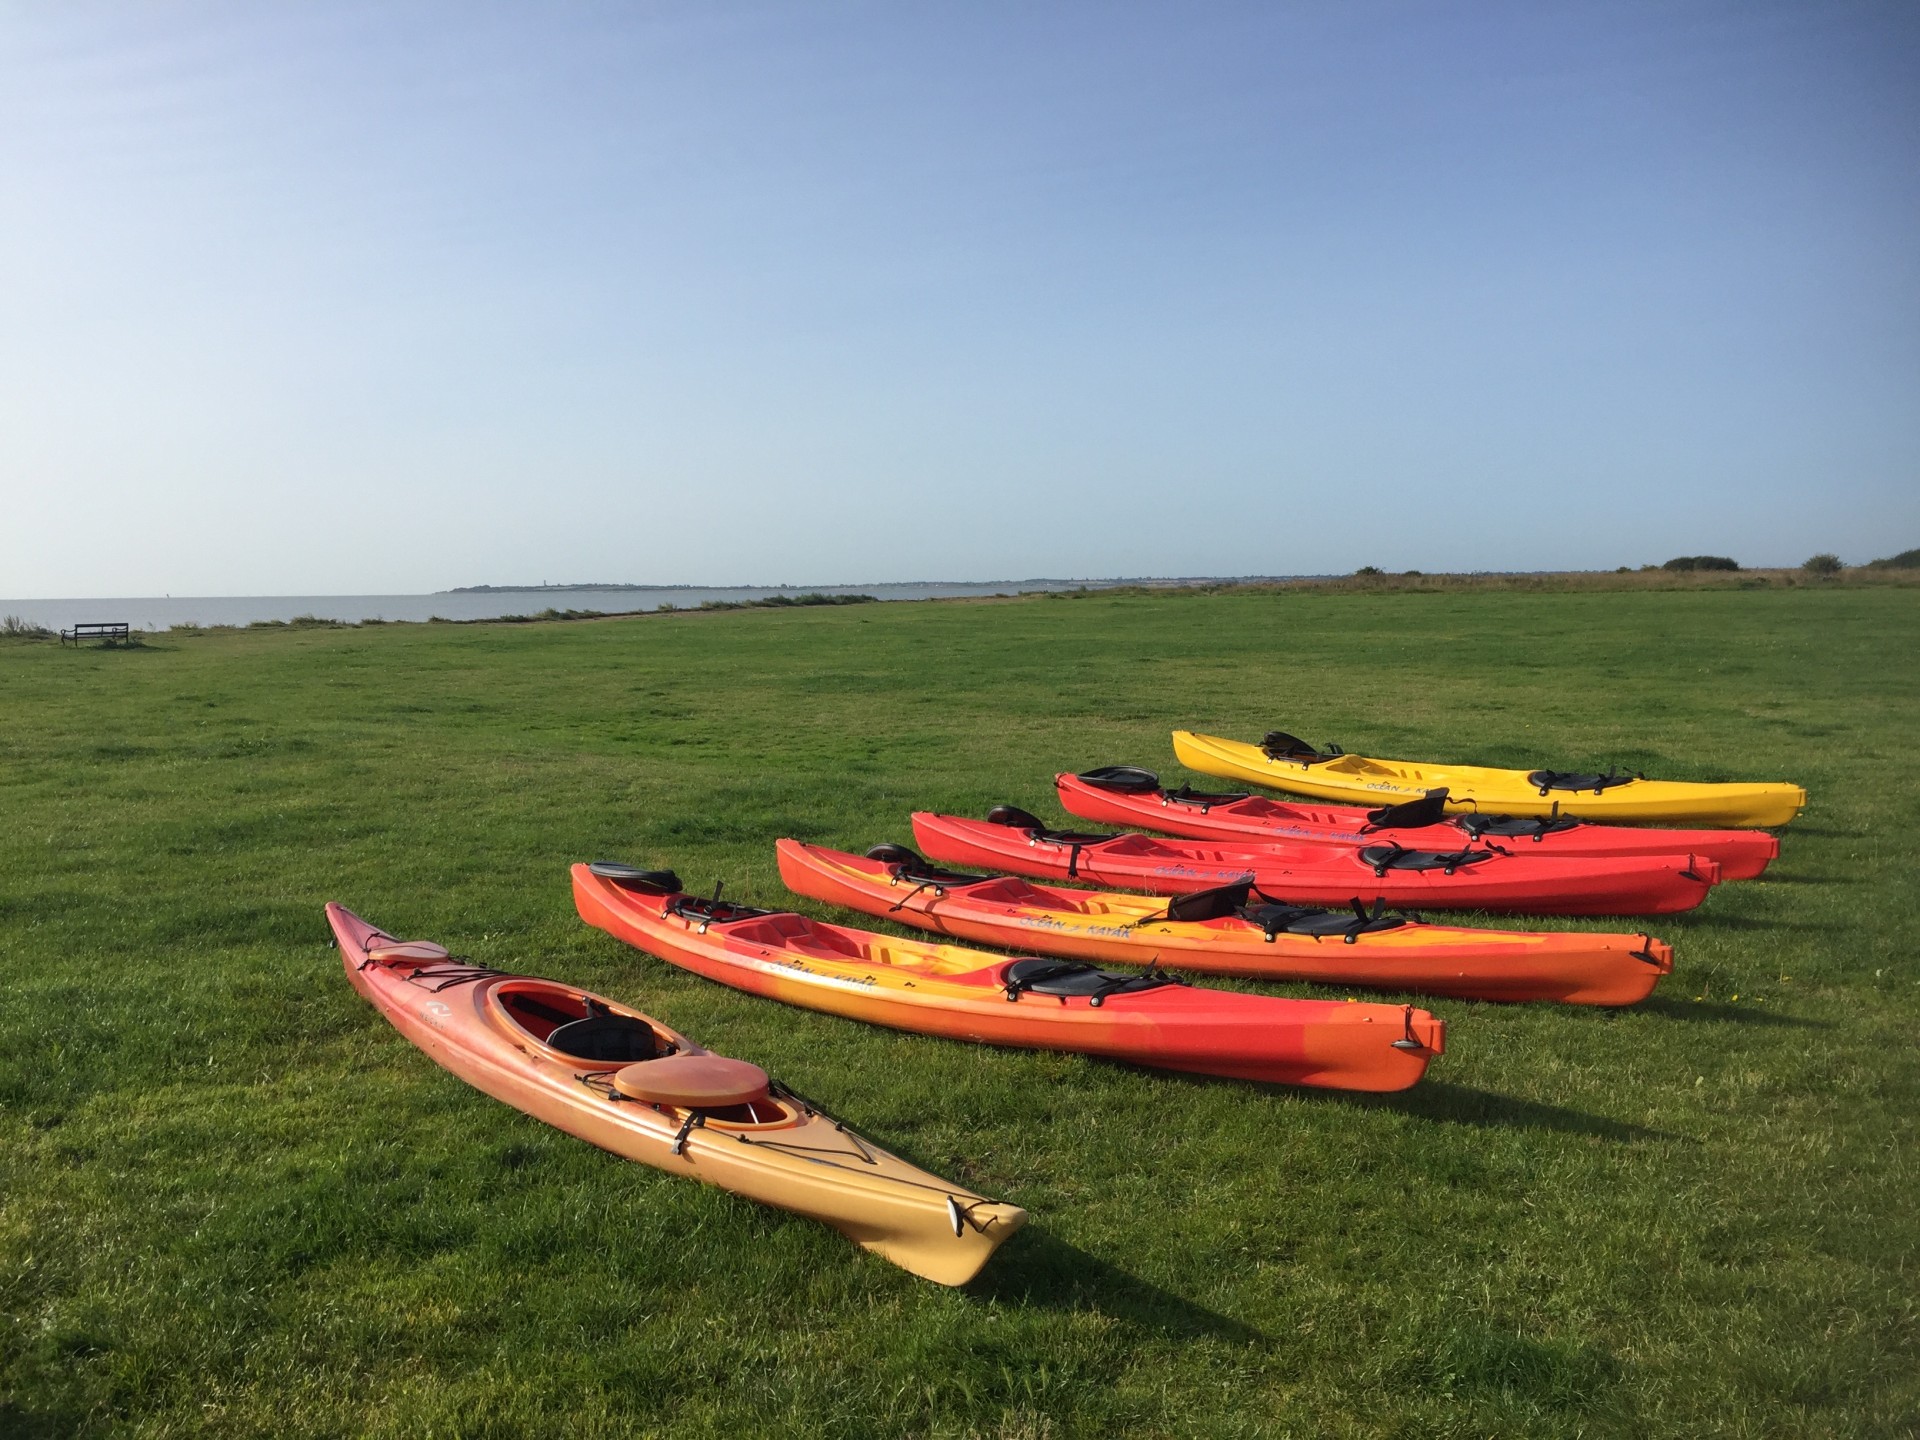 Kayaks laid out on the green grass before launching.